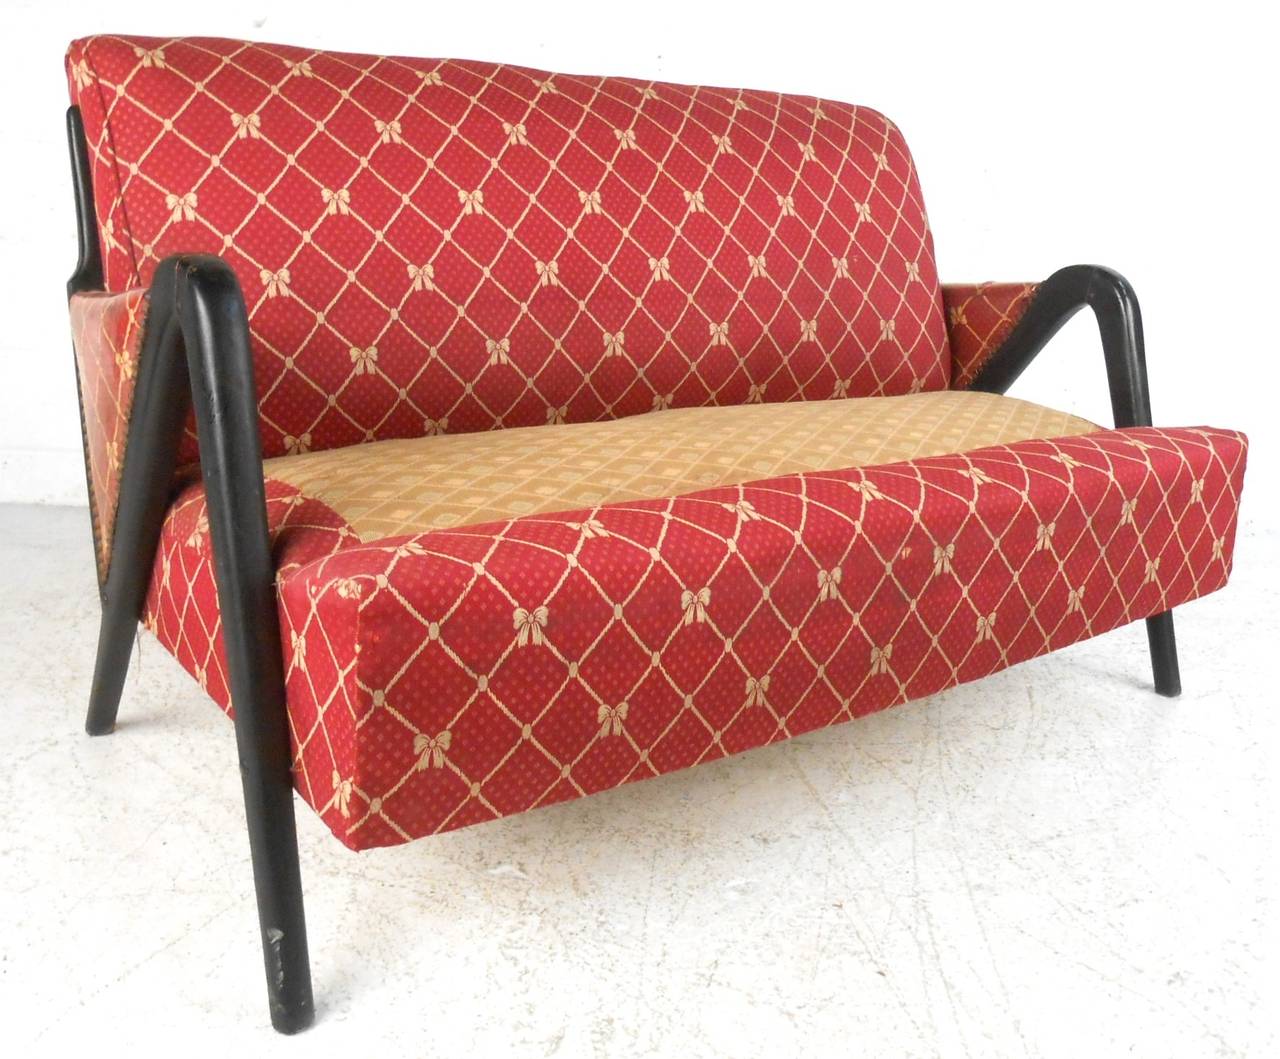 This Italian style sofa features unique sculpted frame covered in rich vintage fabric. Missing original seat cushion must be replaced, unique seating for home or business. Please confirm item location (NY or NJ).